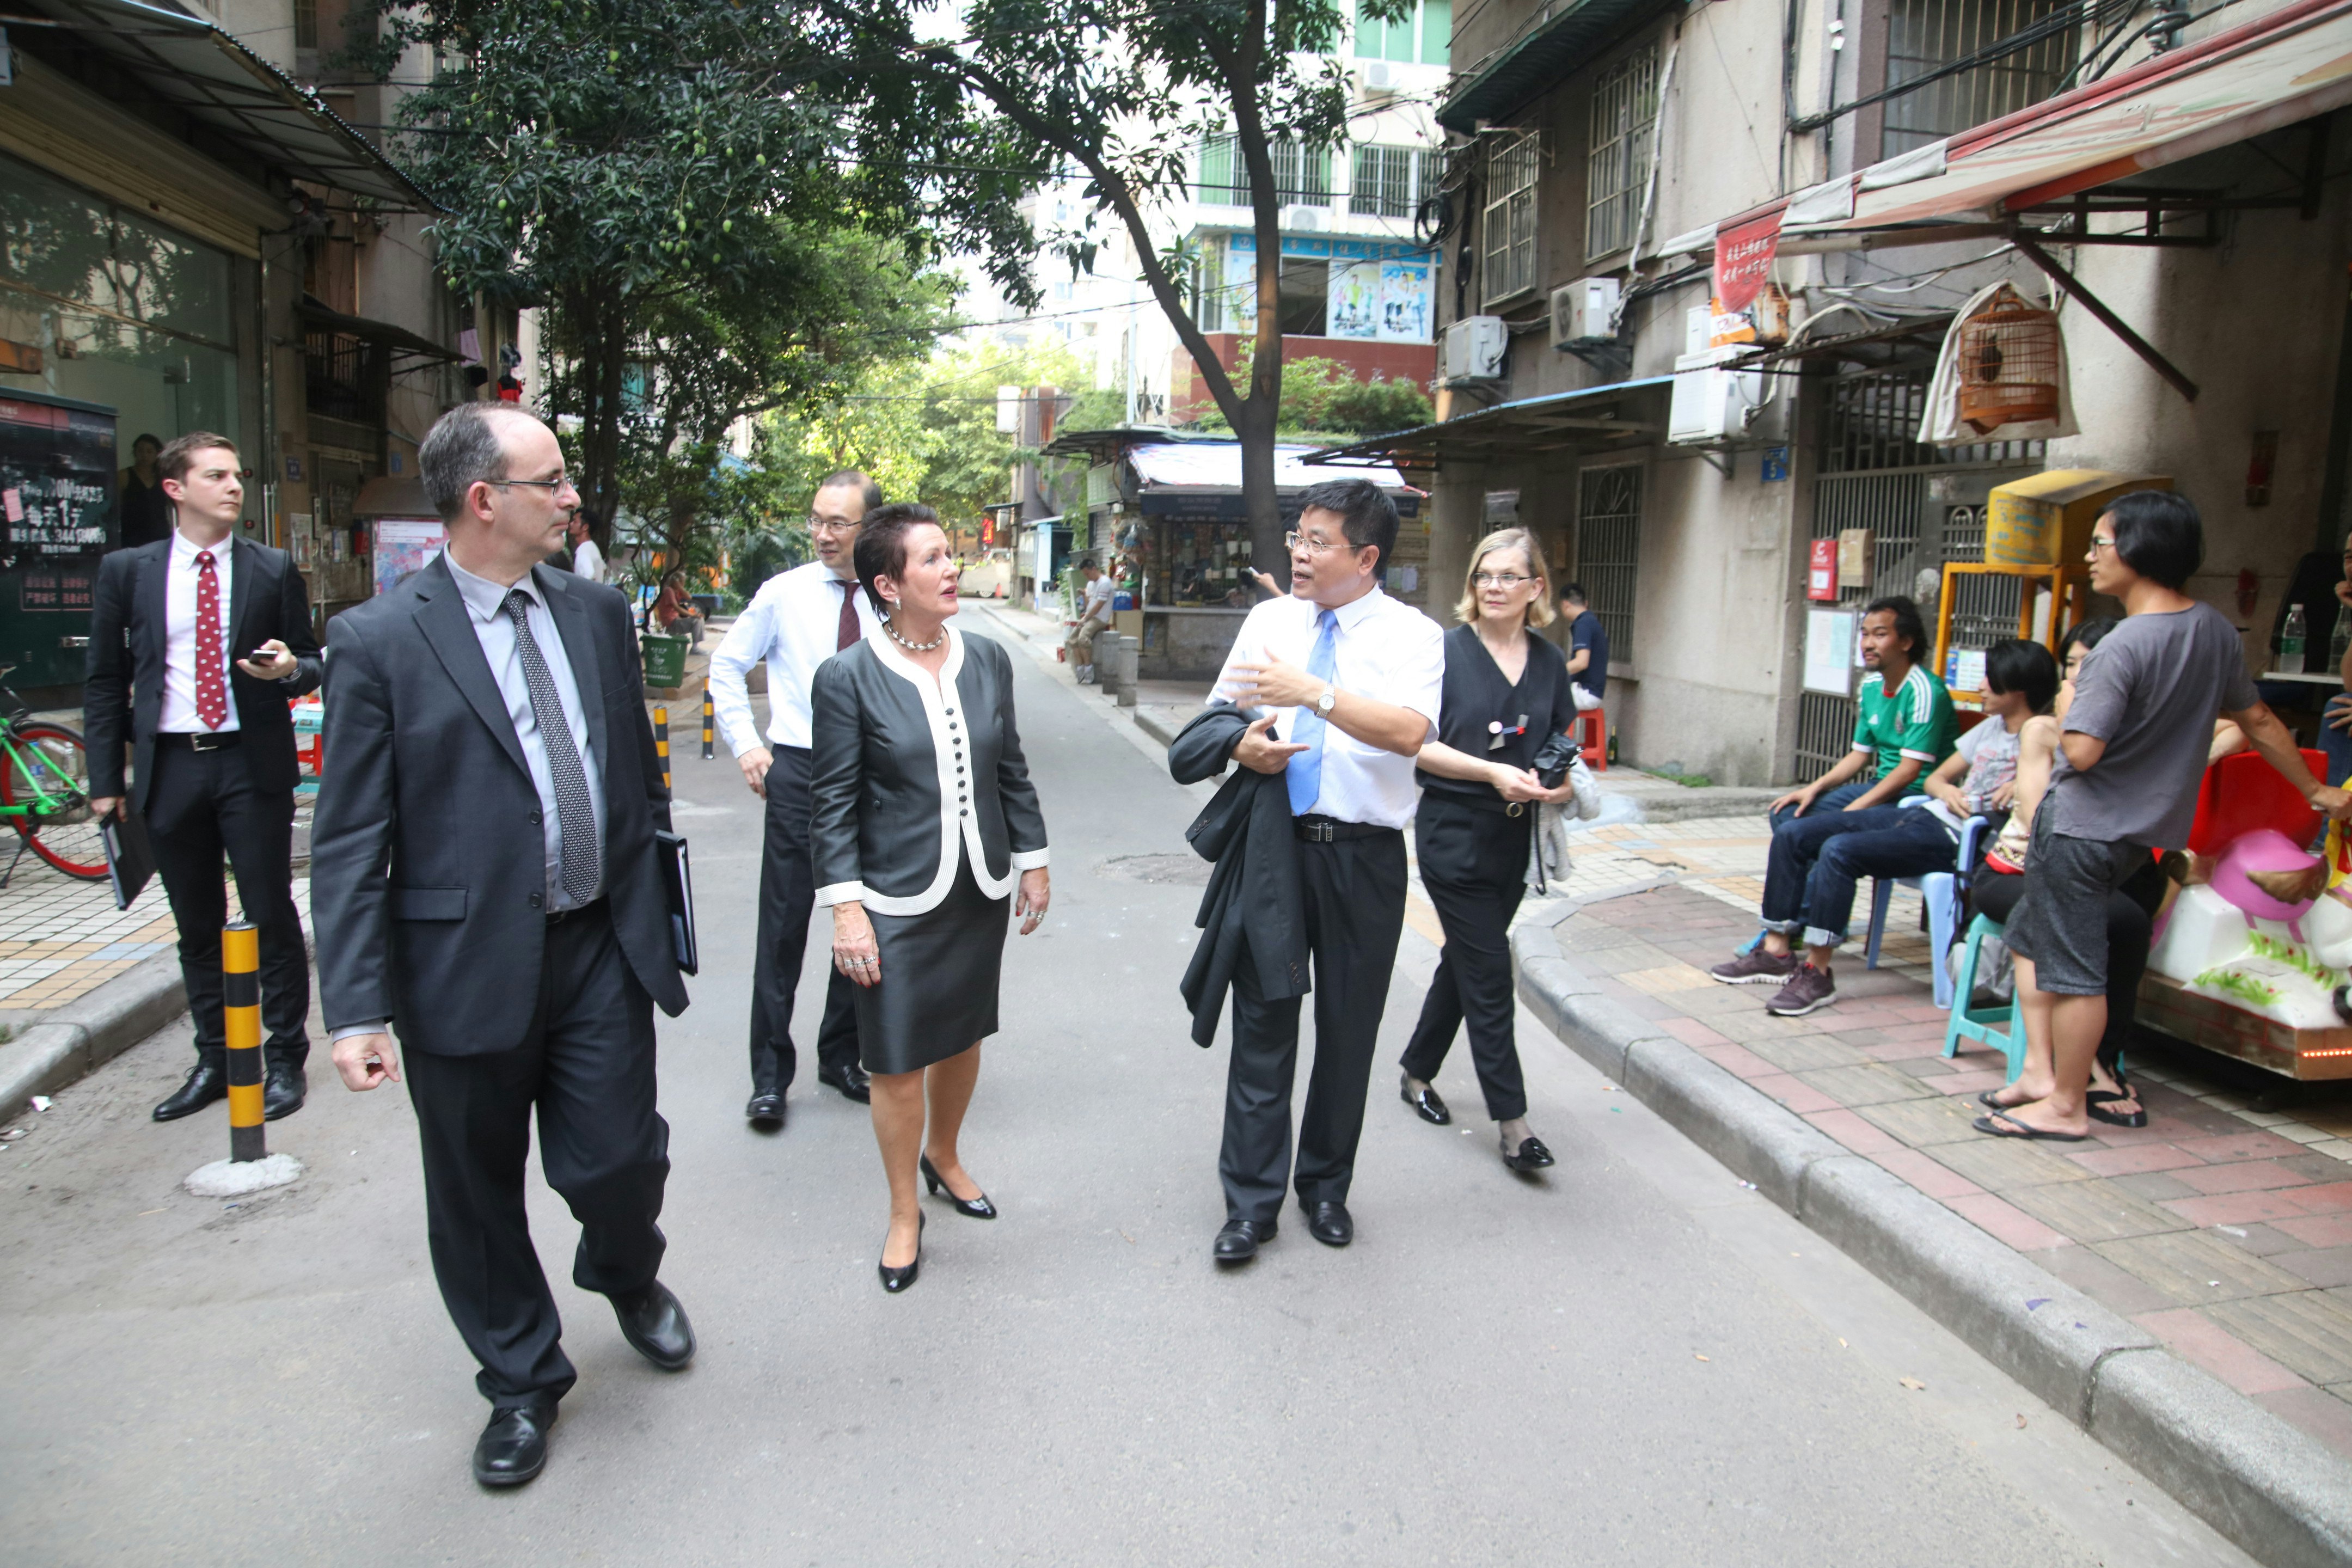 A crowd of council members dressed in business attire walk down a quiet alley.